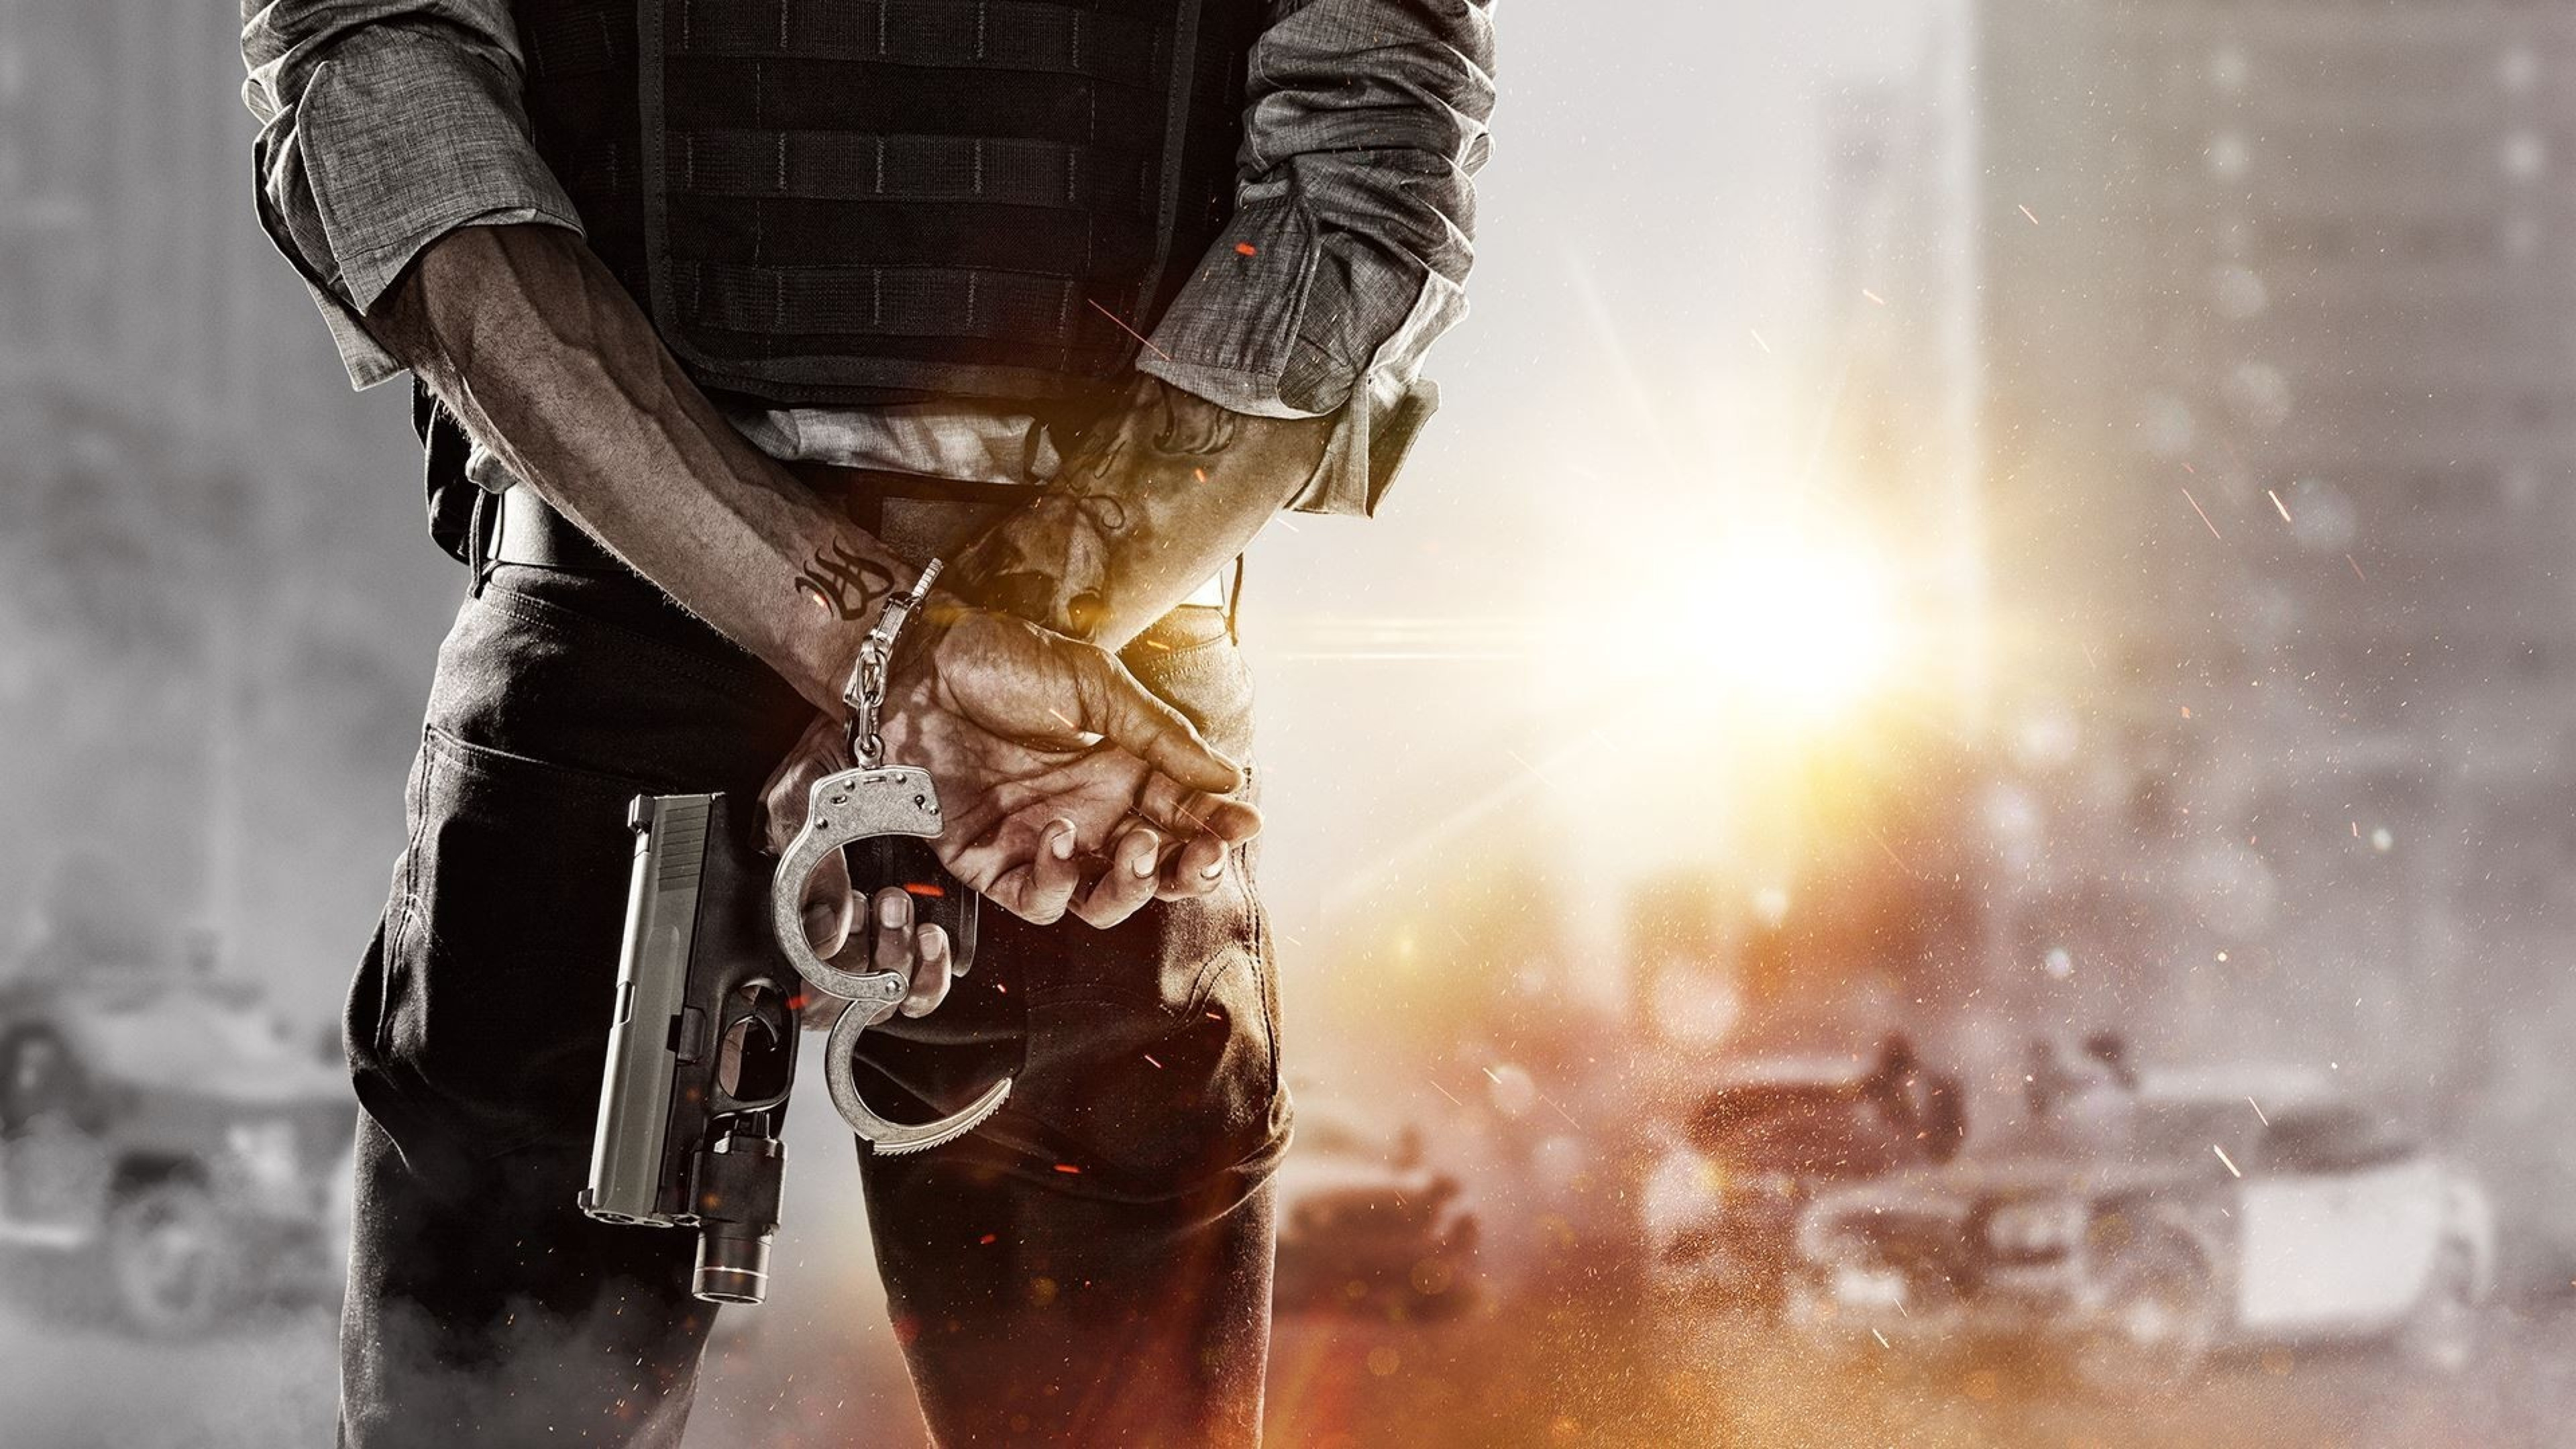 battlefield hardline 4k 1550510525 - Battlefield Hardline 4k - soldier wallpapers, hd-wallpapers, games wallpapers, battlefield wallpapers, 4k-wallpapers